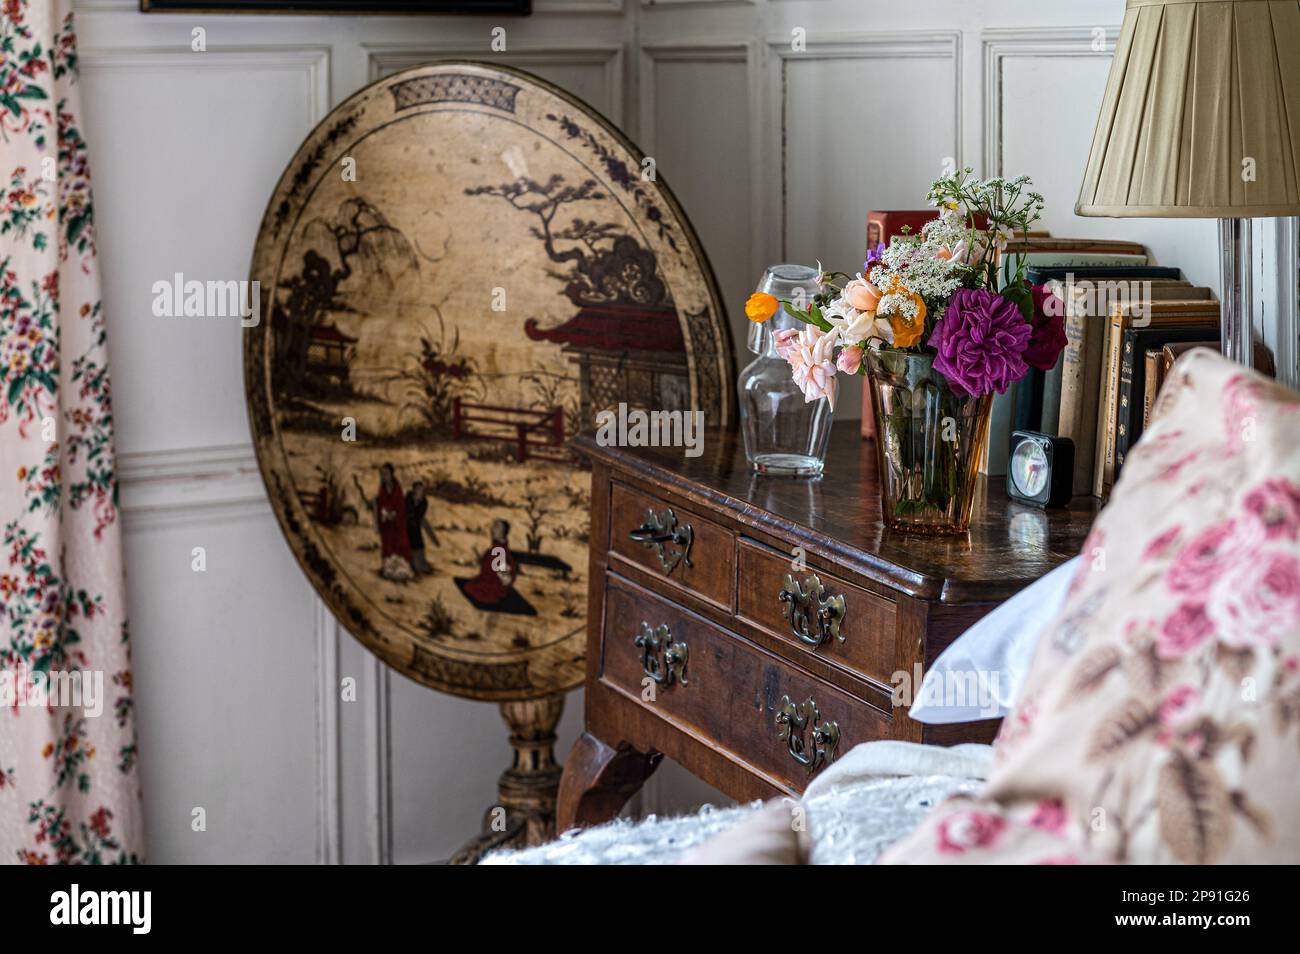 Chinoiserie table at bedside in Wiveton Hall 17th century Jacobean manor house, Norfolk, UK Stock Photo